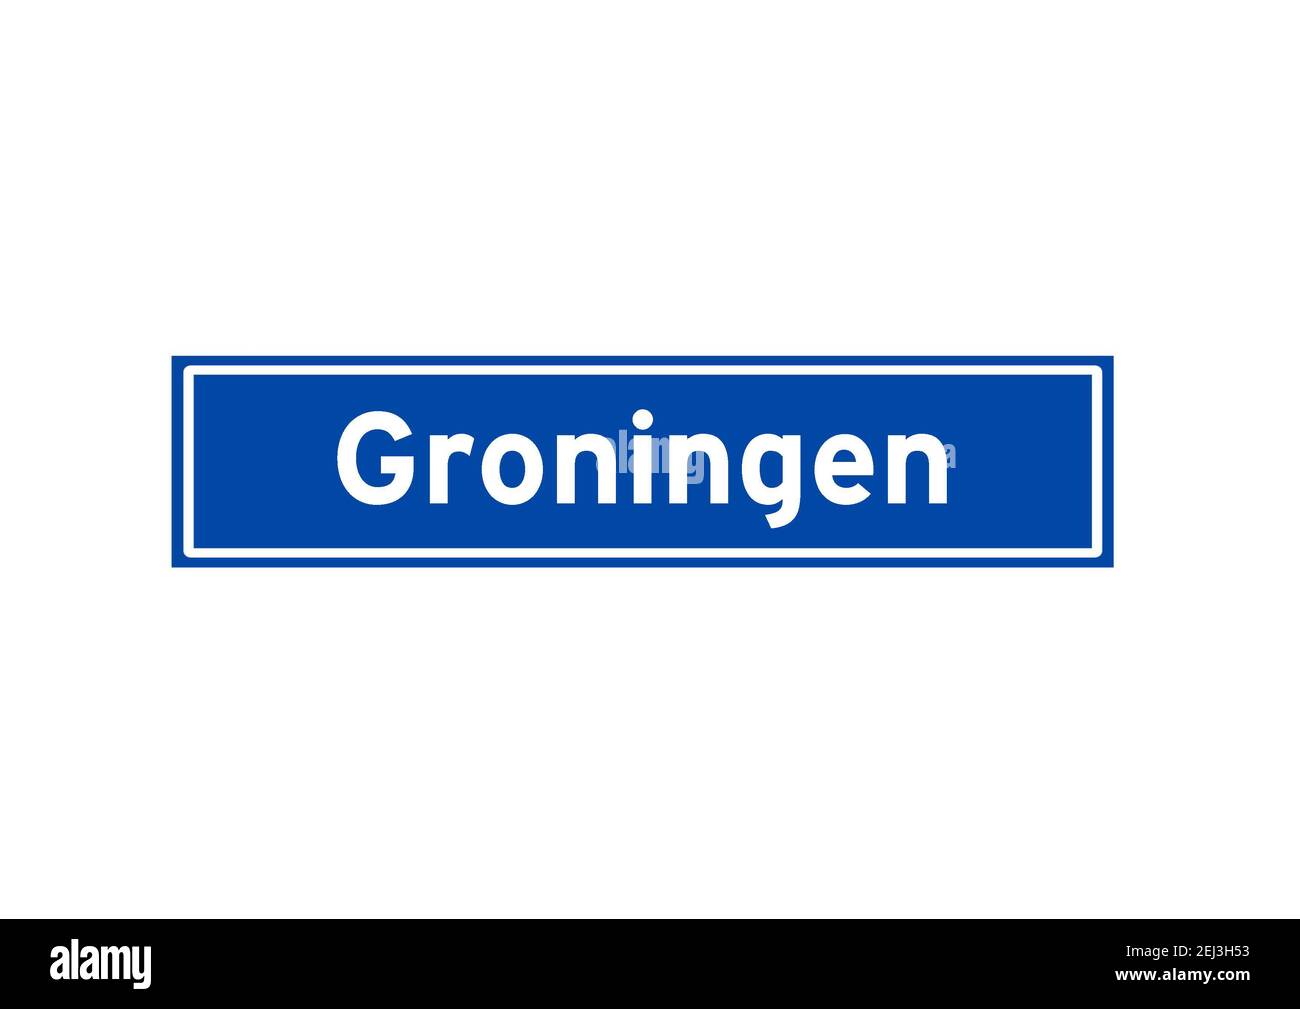 Groningen isolated Dutch place name sign. City sign from the Netherlands. Stock Photo